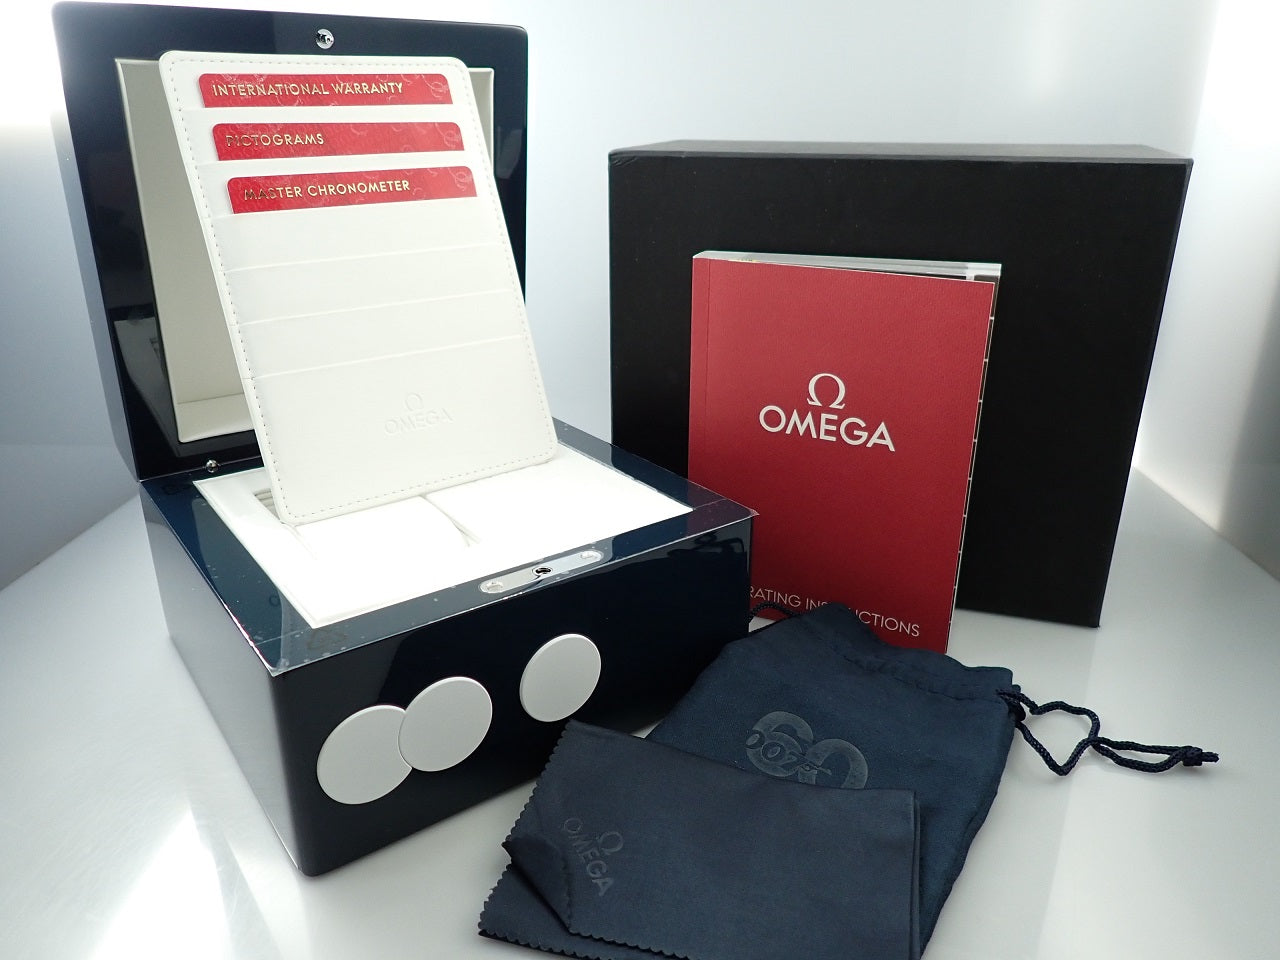 Omega Seamaster Diver 300M Co-Axial Master Chronometer 42MM &lt;Warranty, Box, etc.&gt;